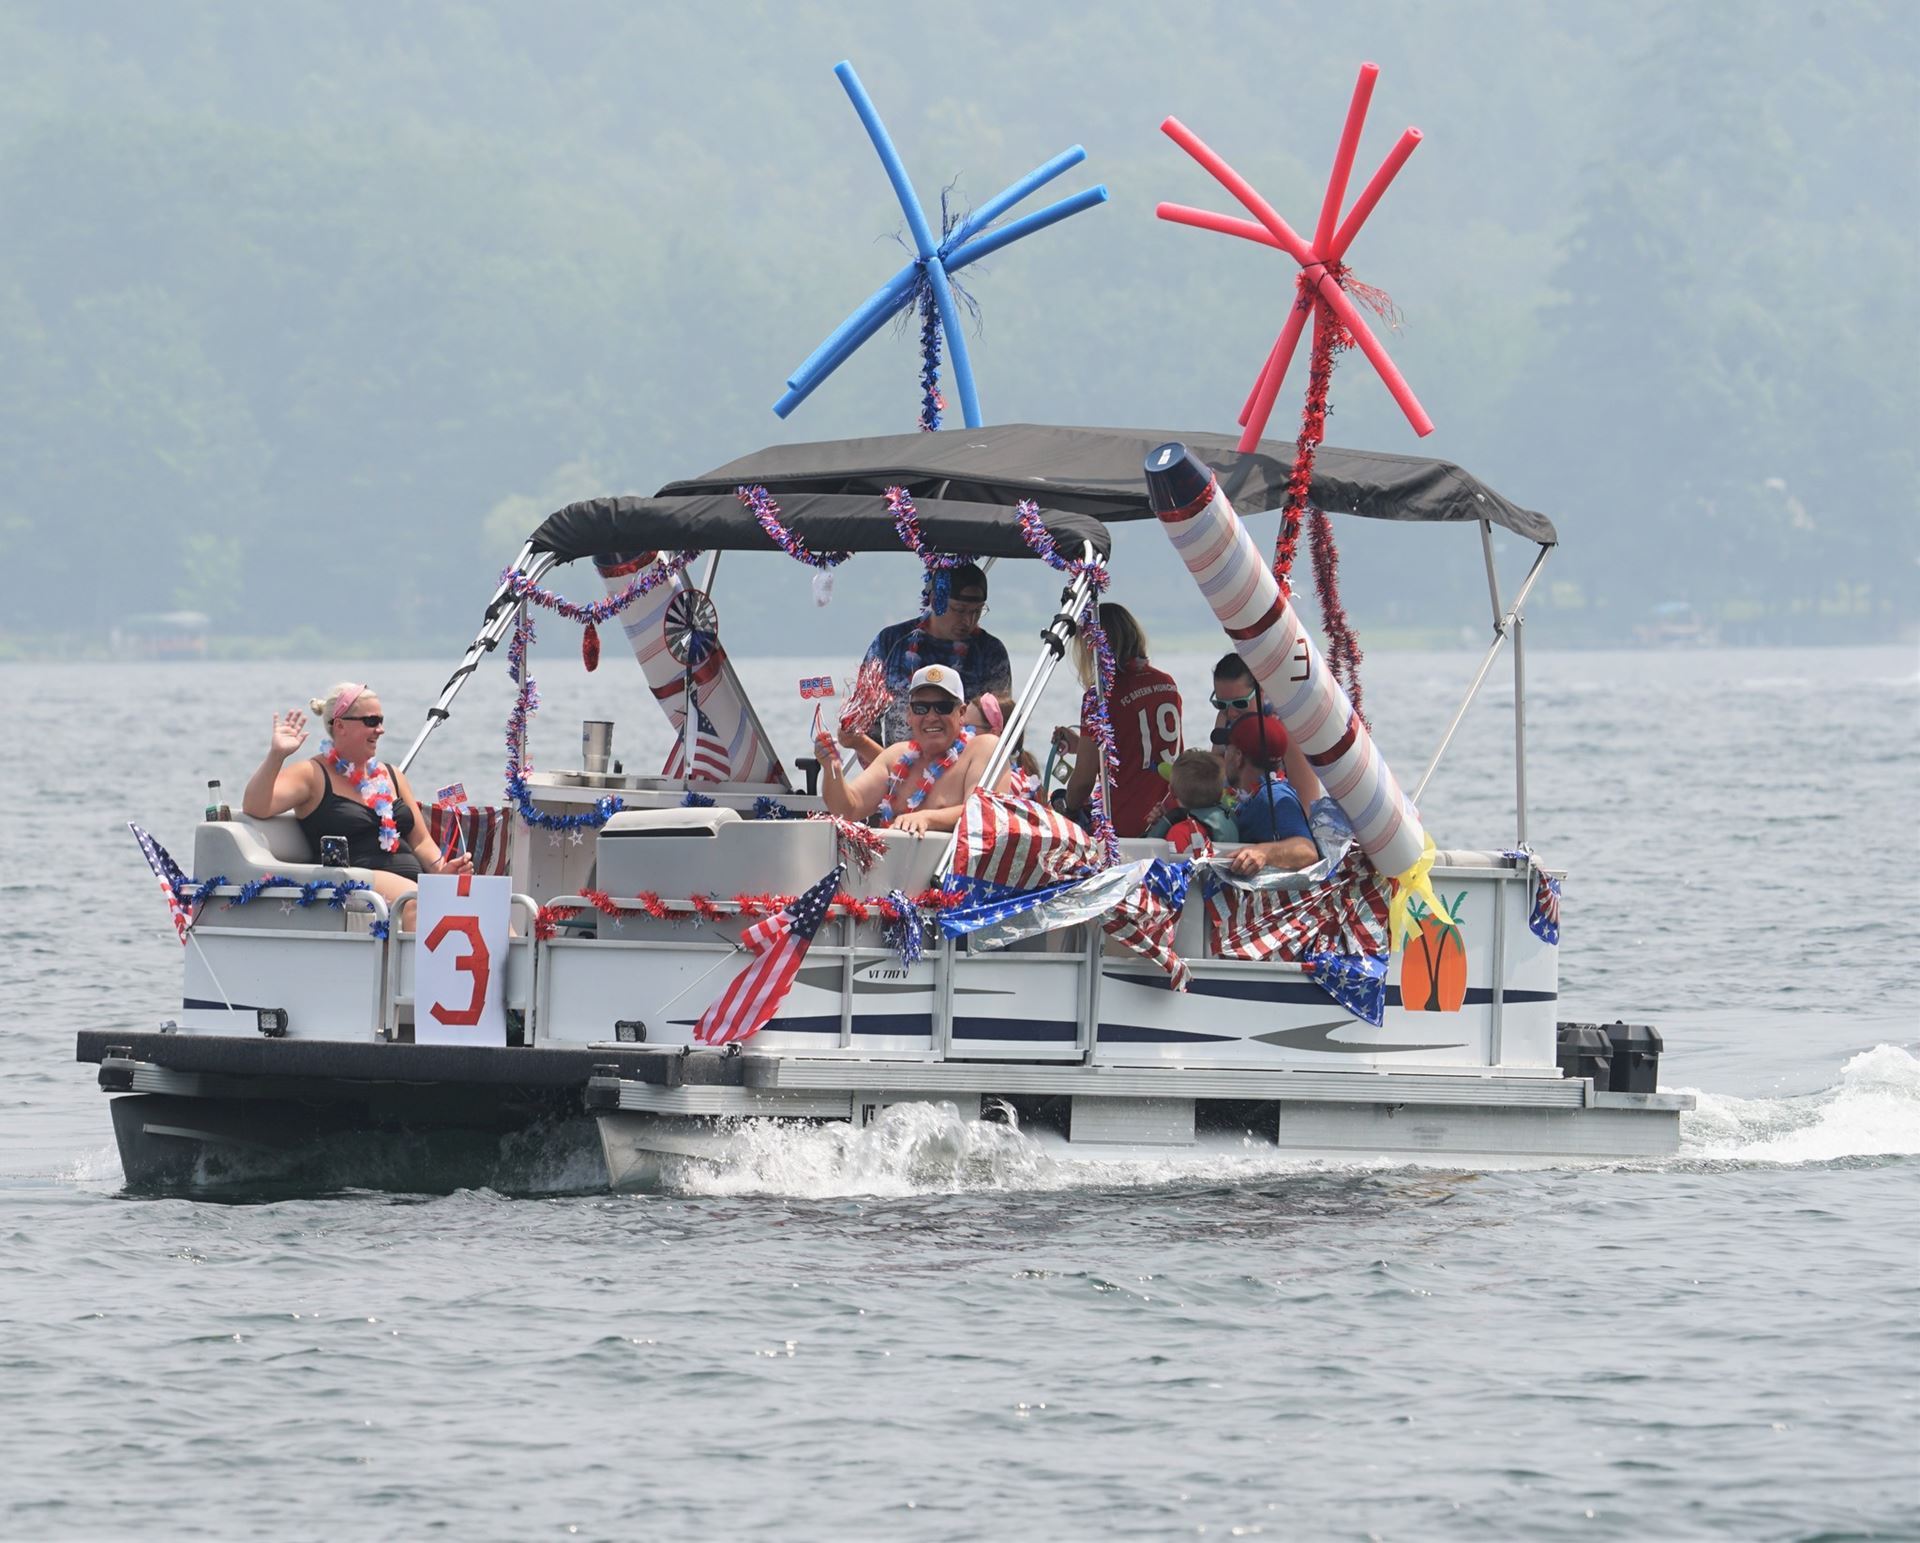 LSCA's 11th Annual Boat Parade